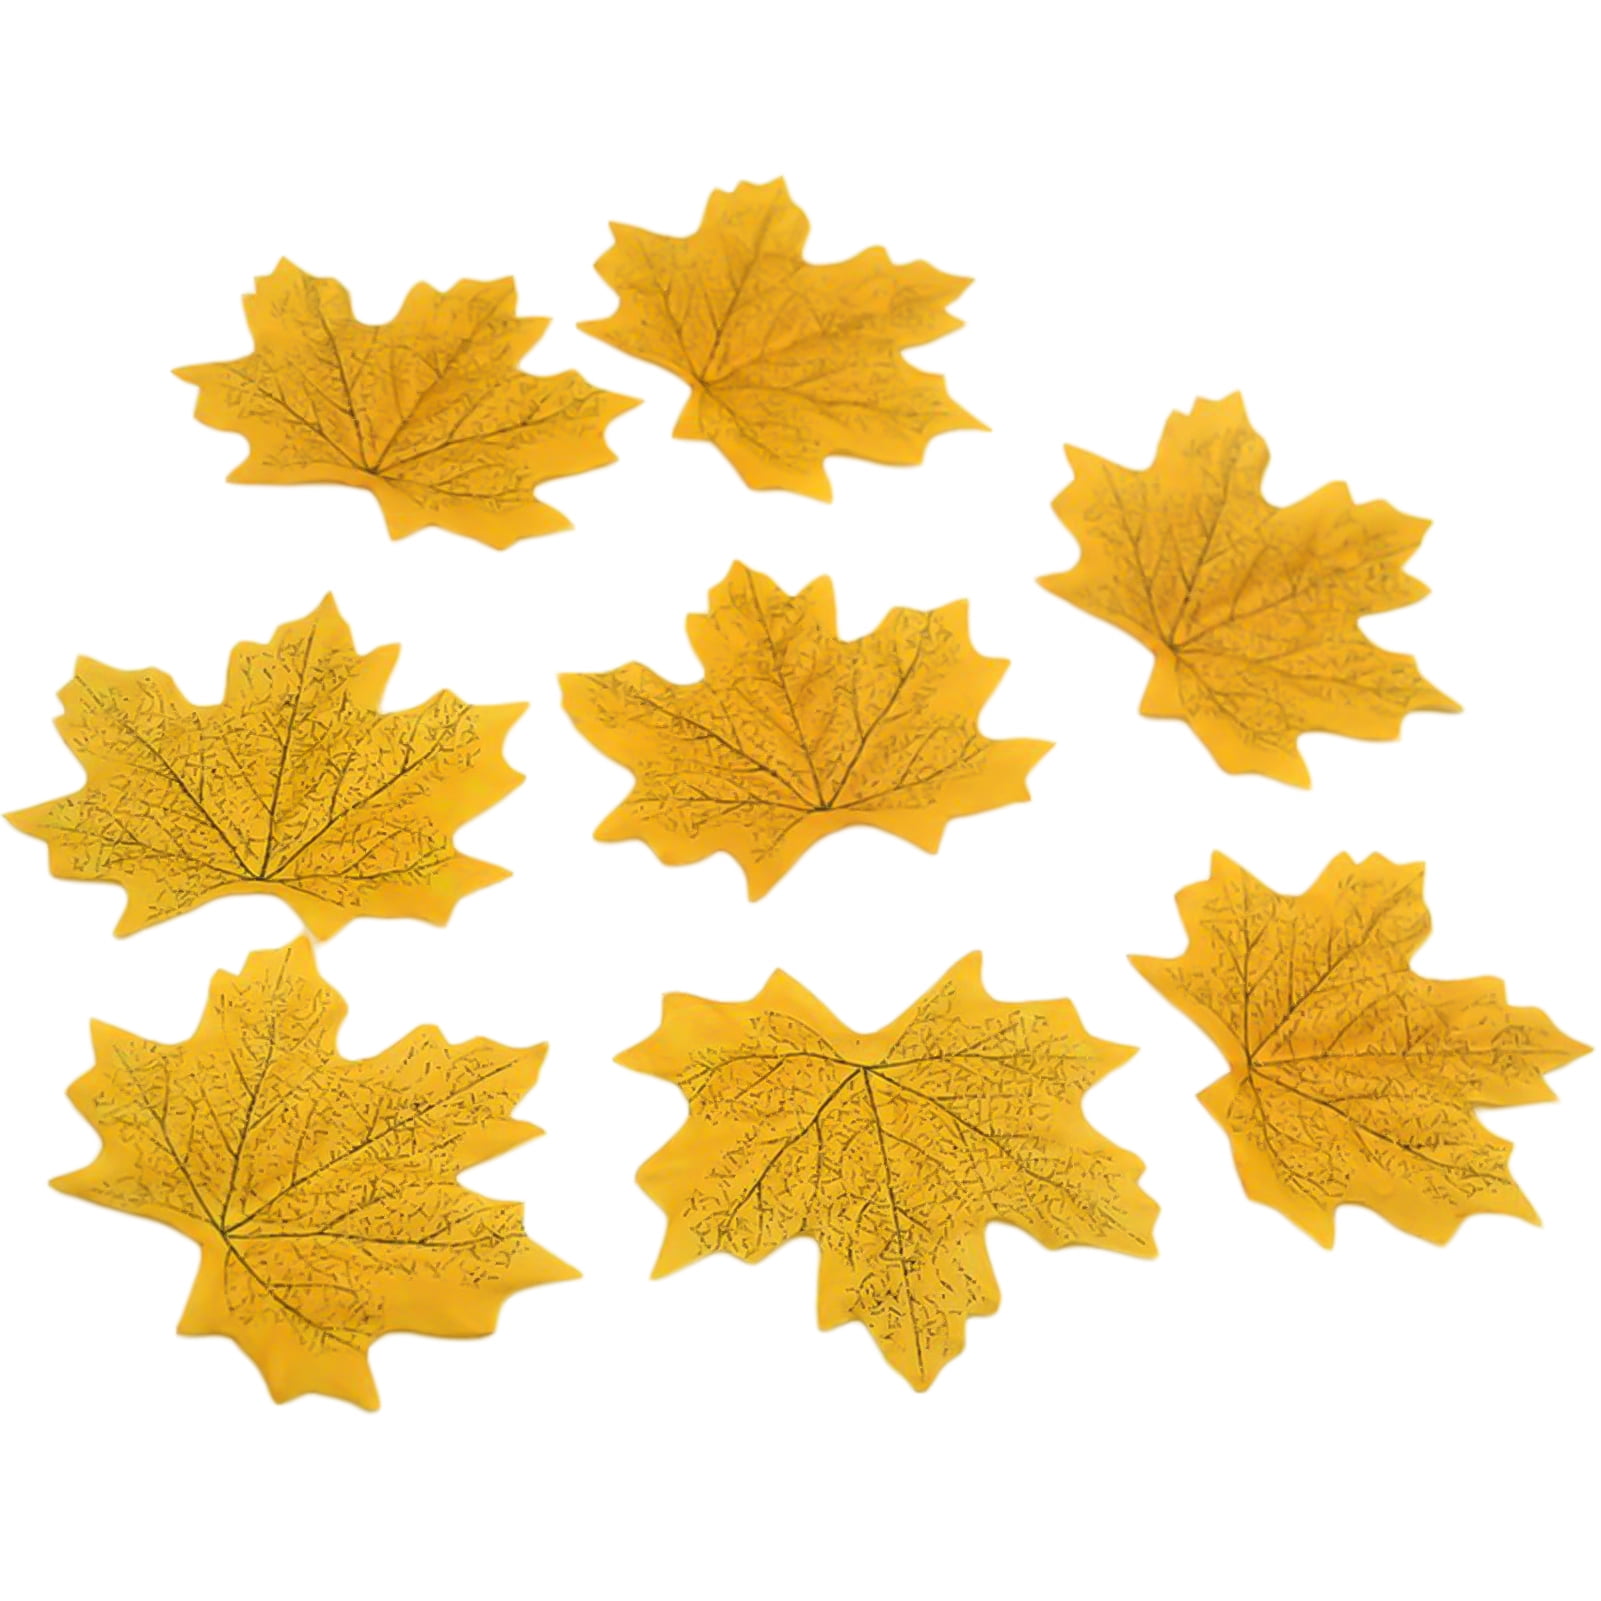  Aydinids 50 Pcs Maple Leaves Charms Leaf Fall Charms